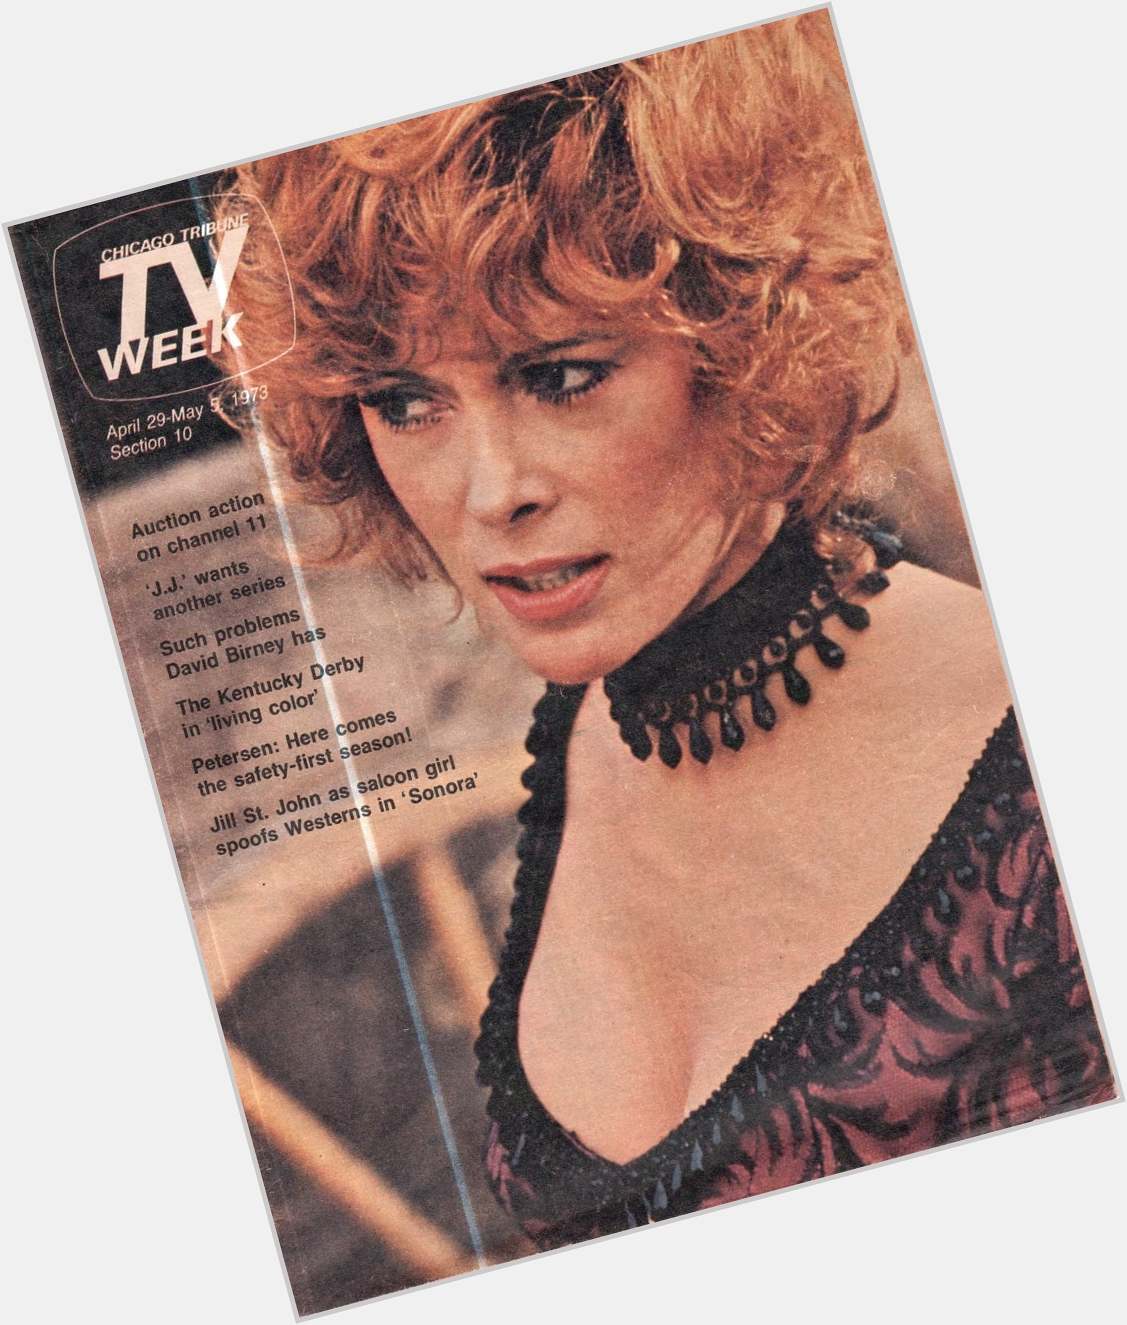 Happy Birthday to Jill St. John, born on this date in 1940
Chicago Tribune TV Week.  April 29 - May 5, 1973 